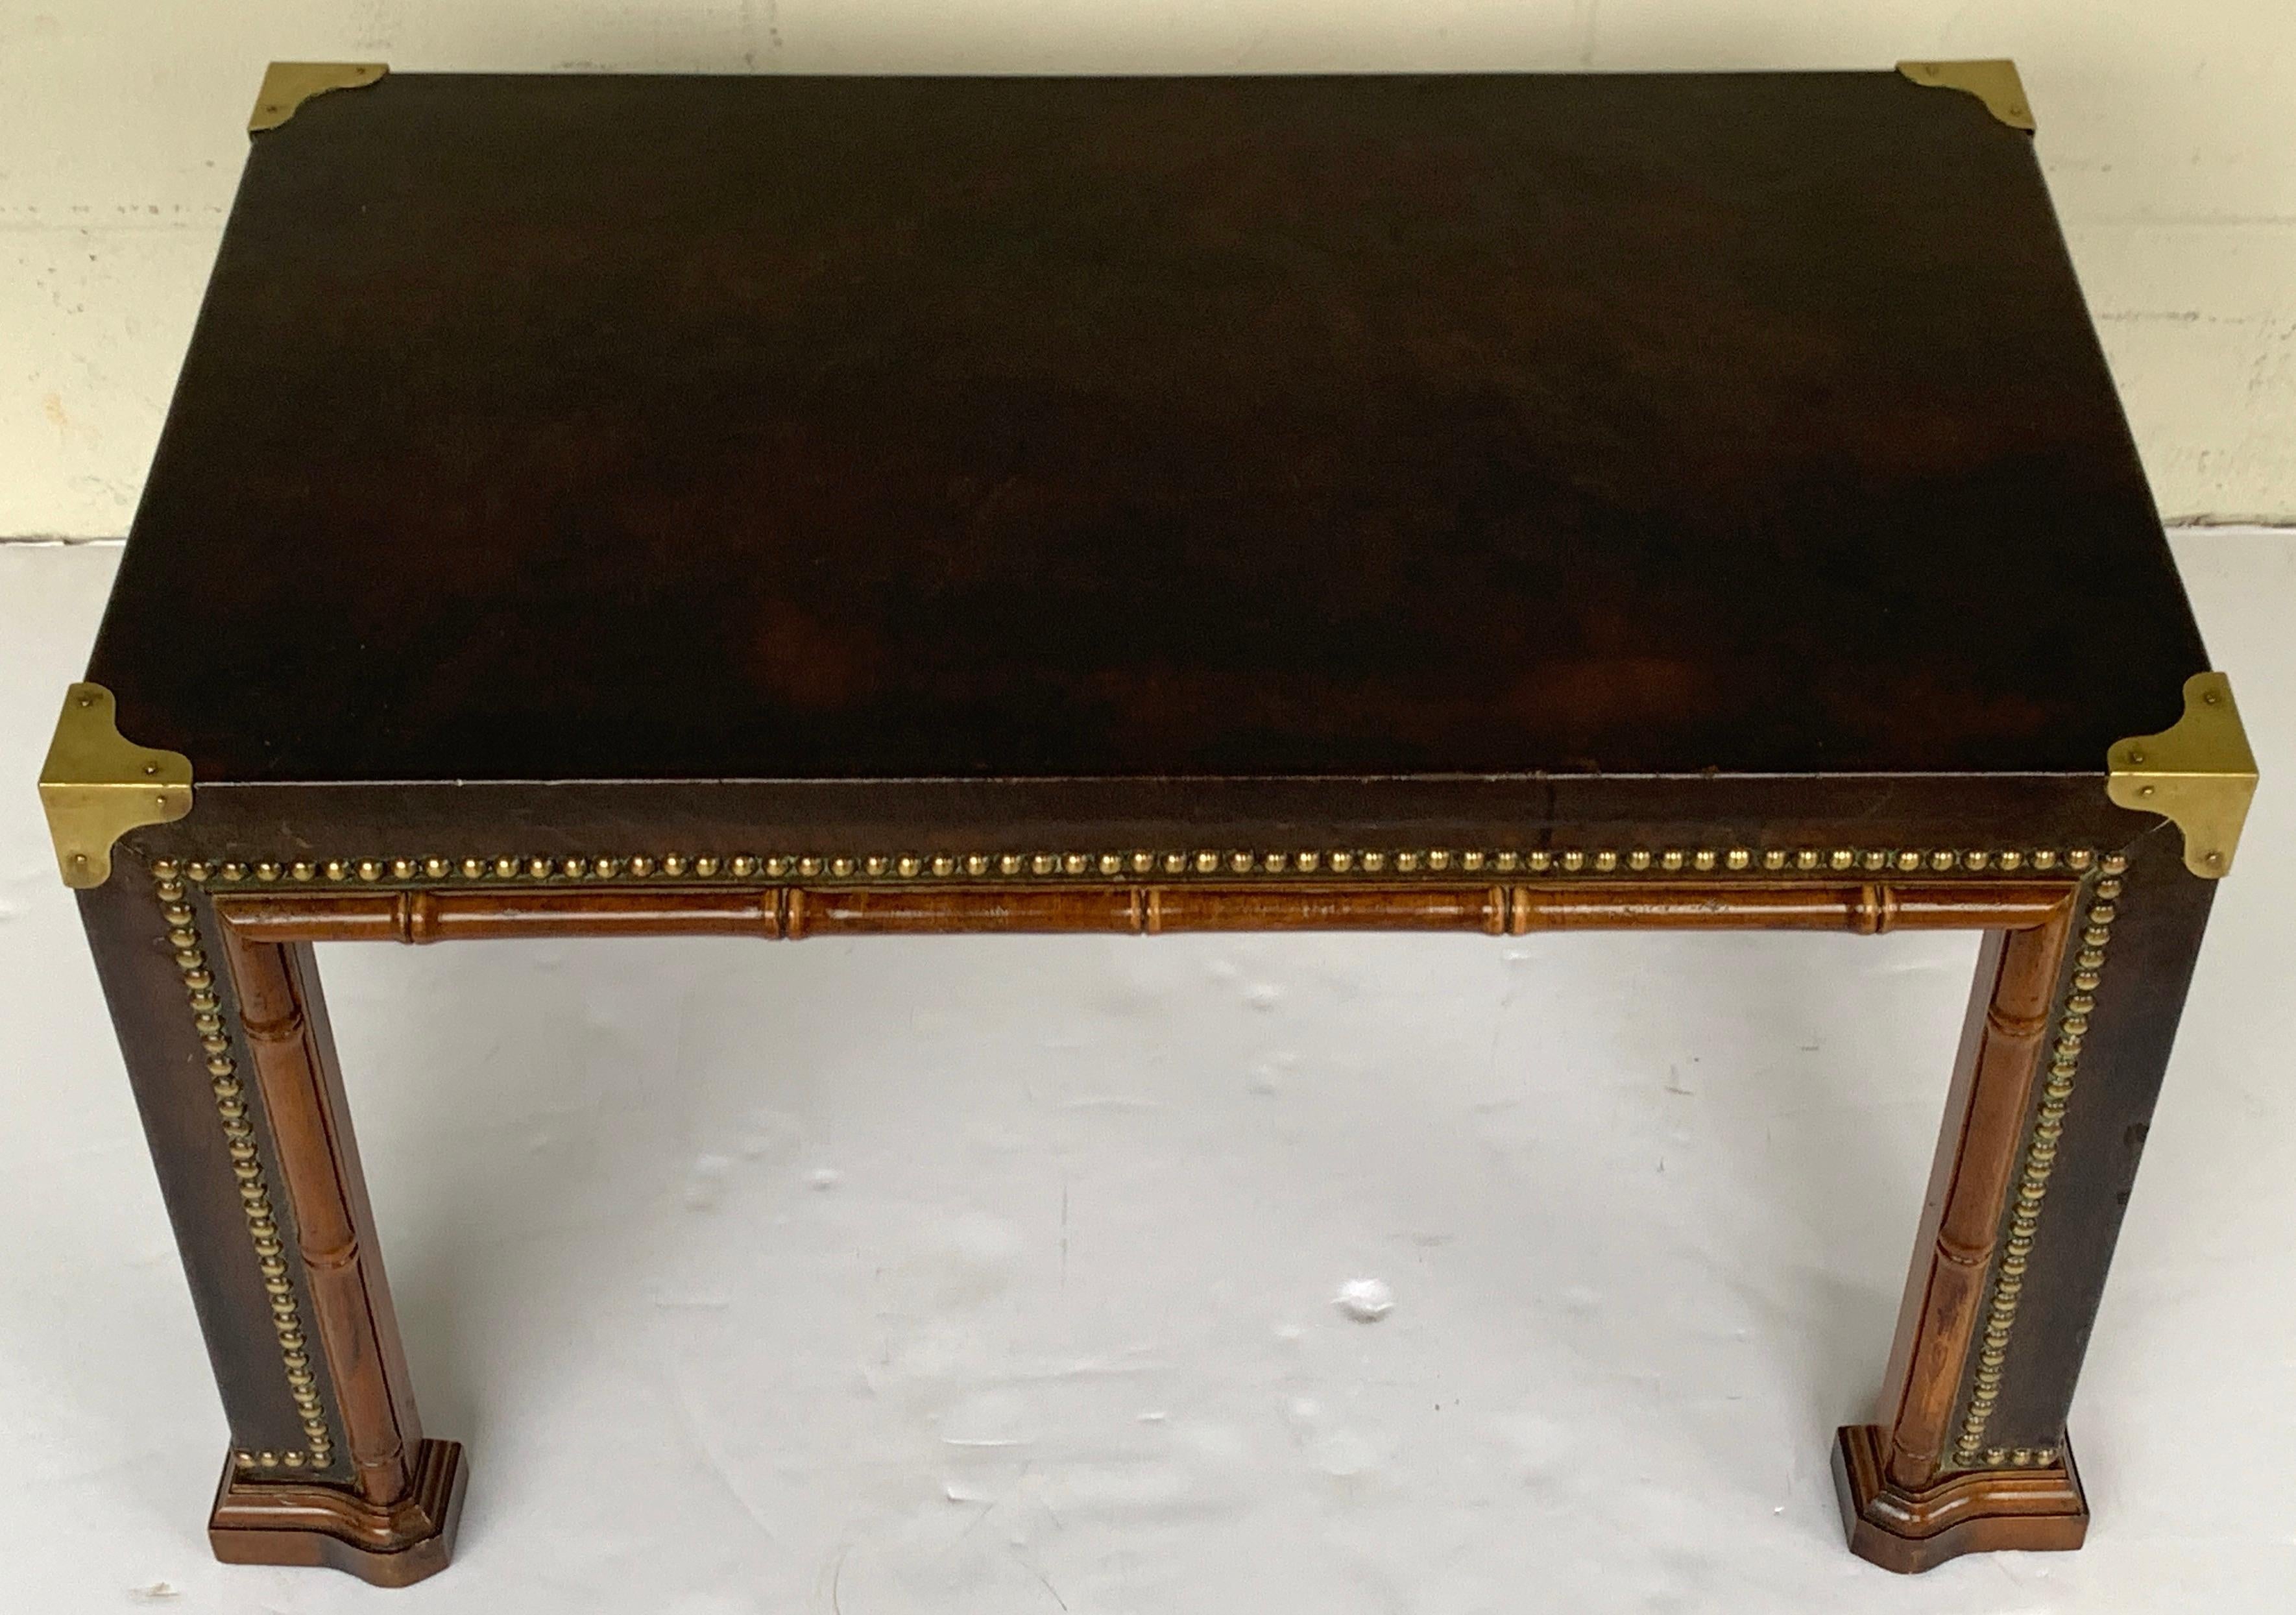 Diminutive faux bamboo brass studded & leather coffee table, of rectangular form with four brass corners, leather wrapped top and legs with continuous brass nail heads. 

